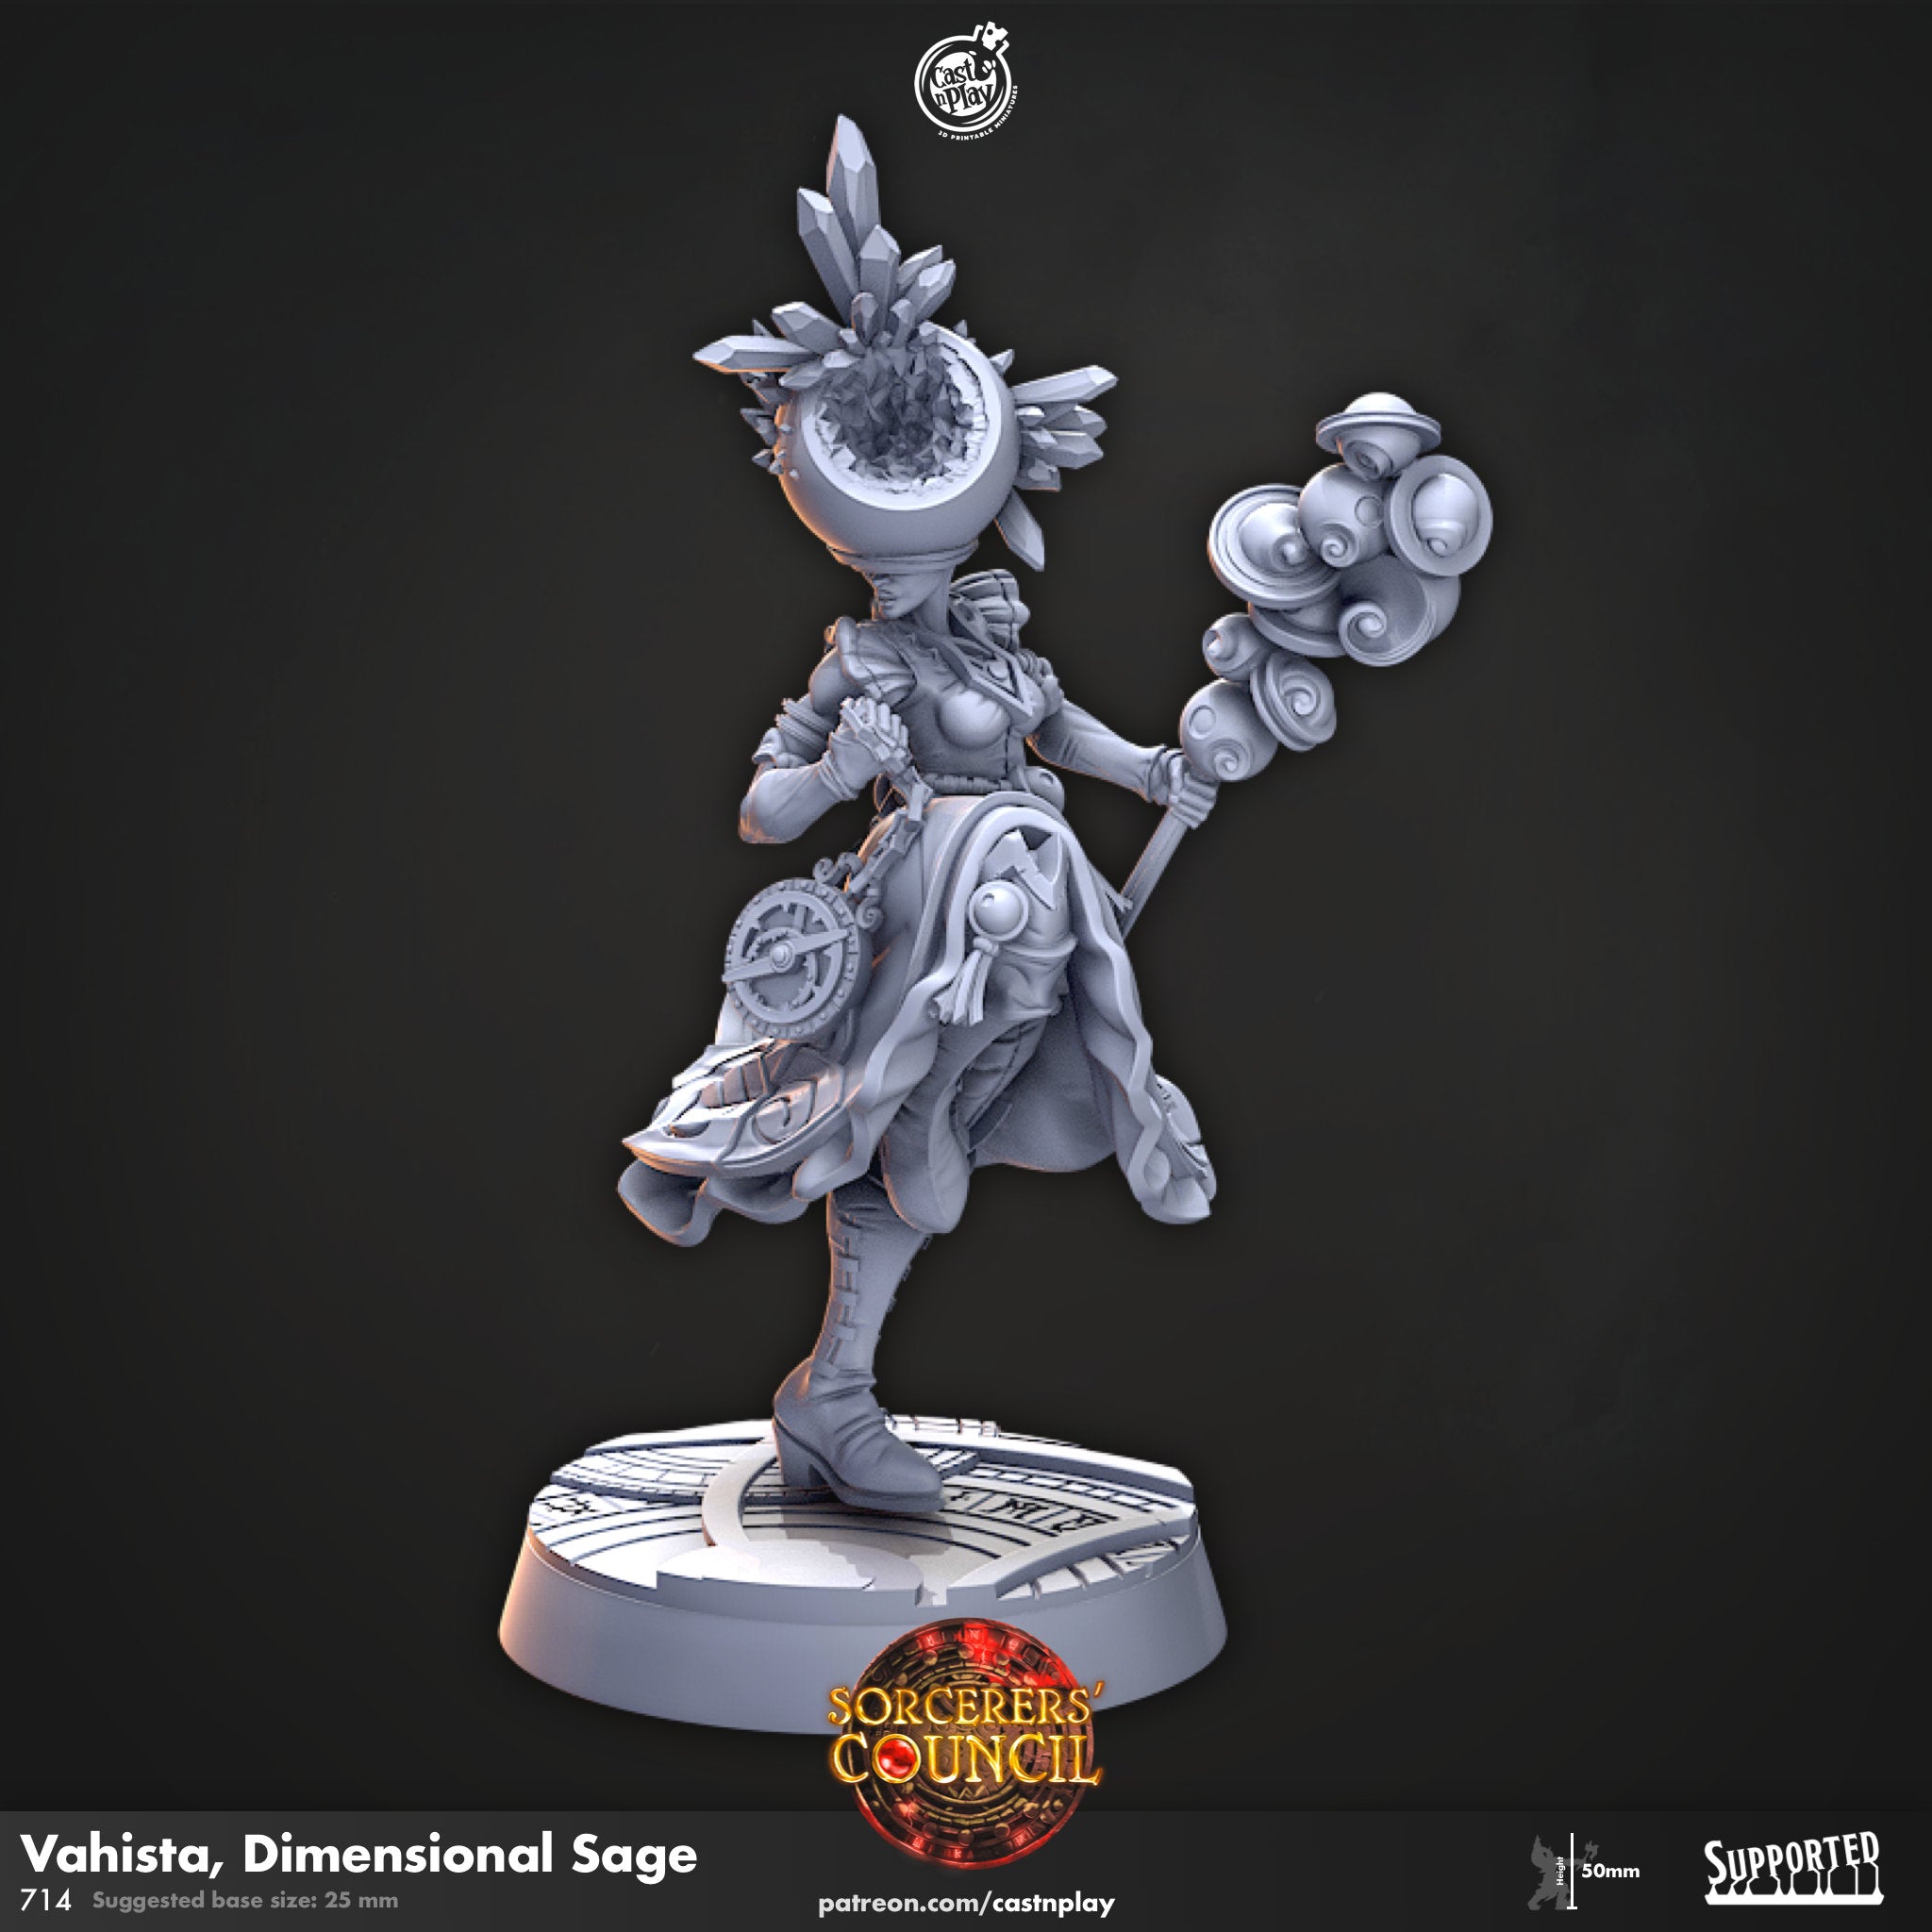 Vahista, Dimensional Sage by Cast N Play (Sorcerer's Council)